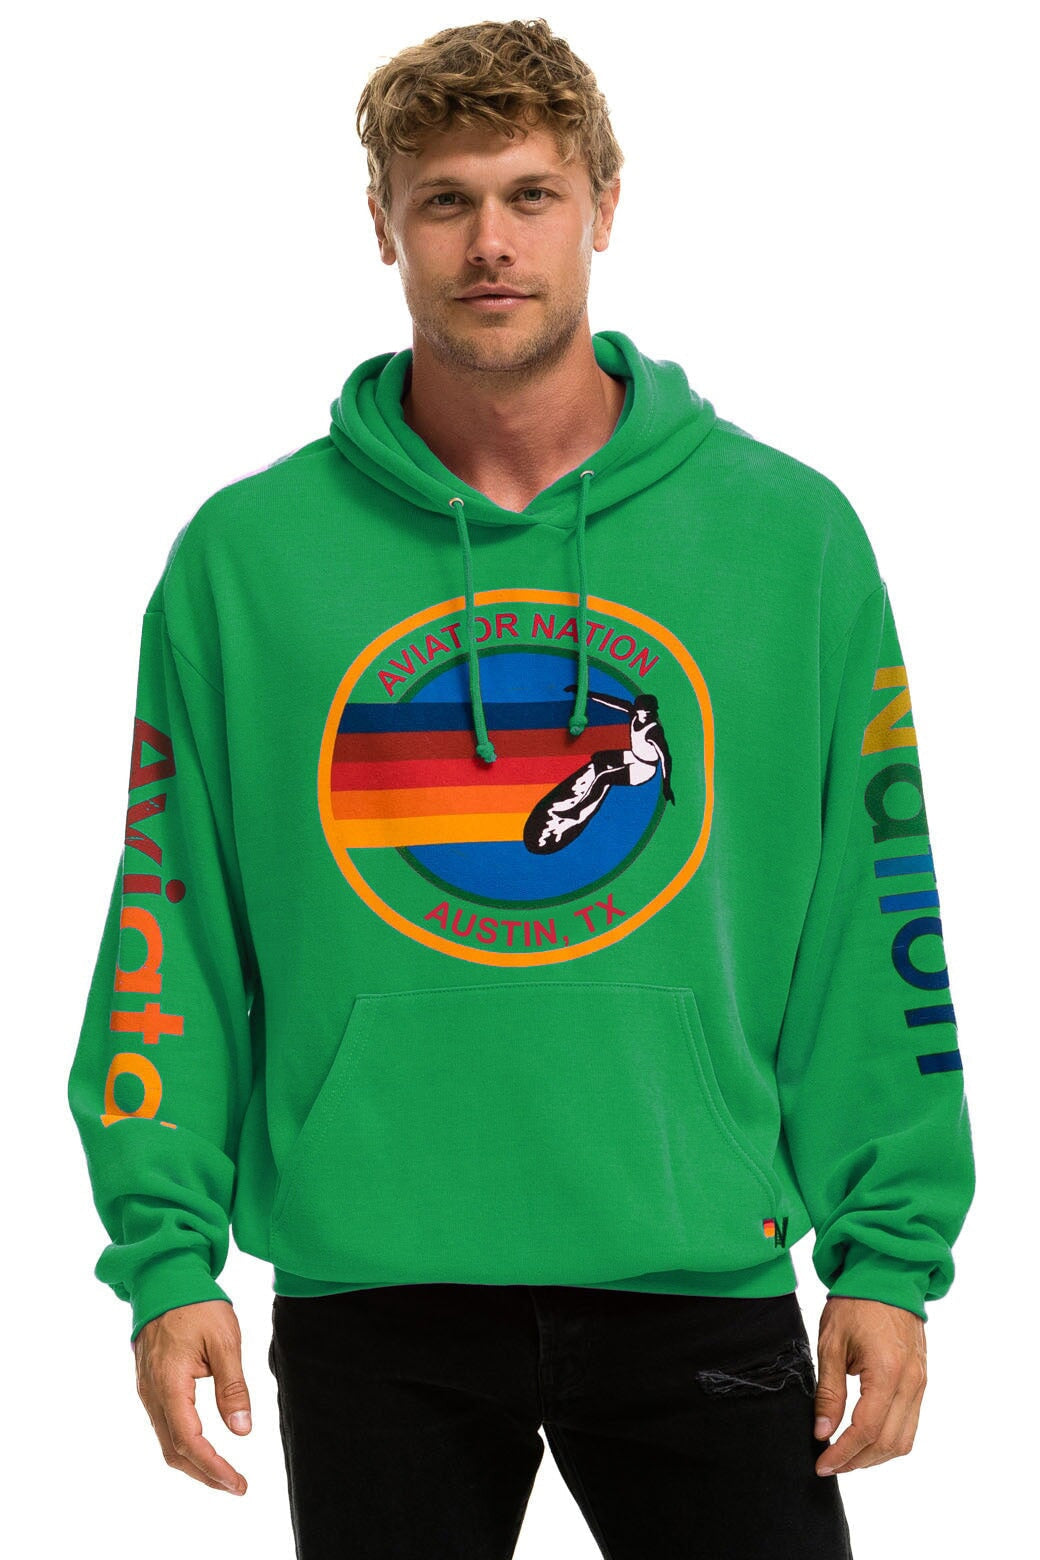 AVIATOR NATION AUSTIN RELAXED PULLOVER HOODIE - KELLY GREEN Hoodie Aviator Nation 